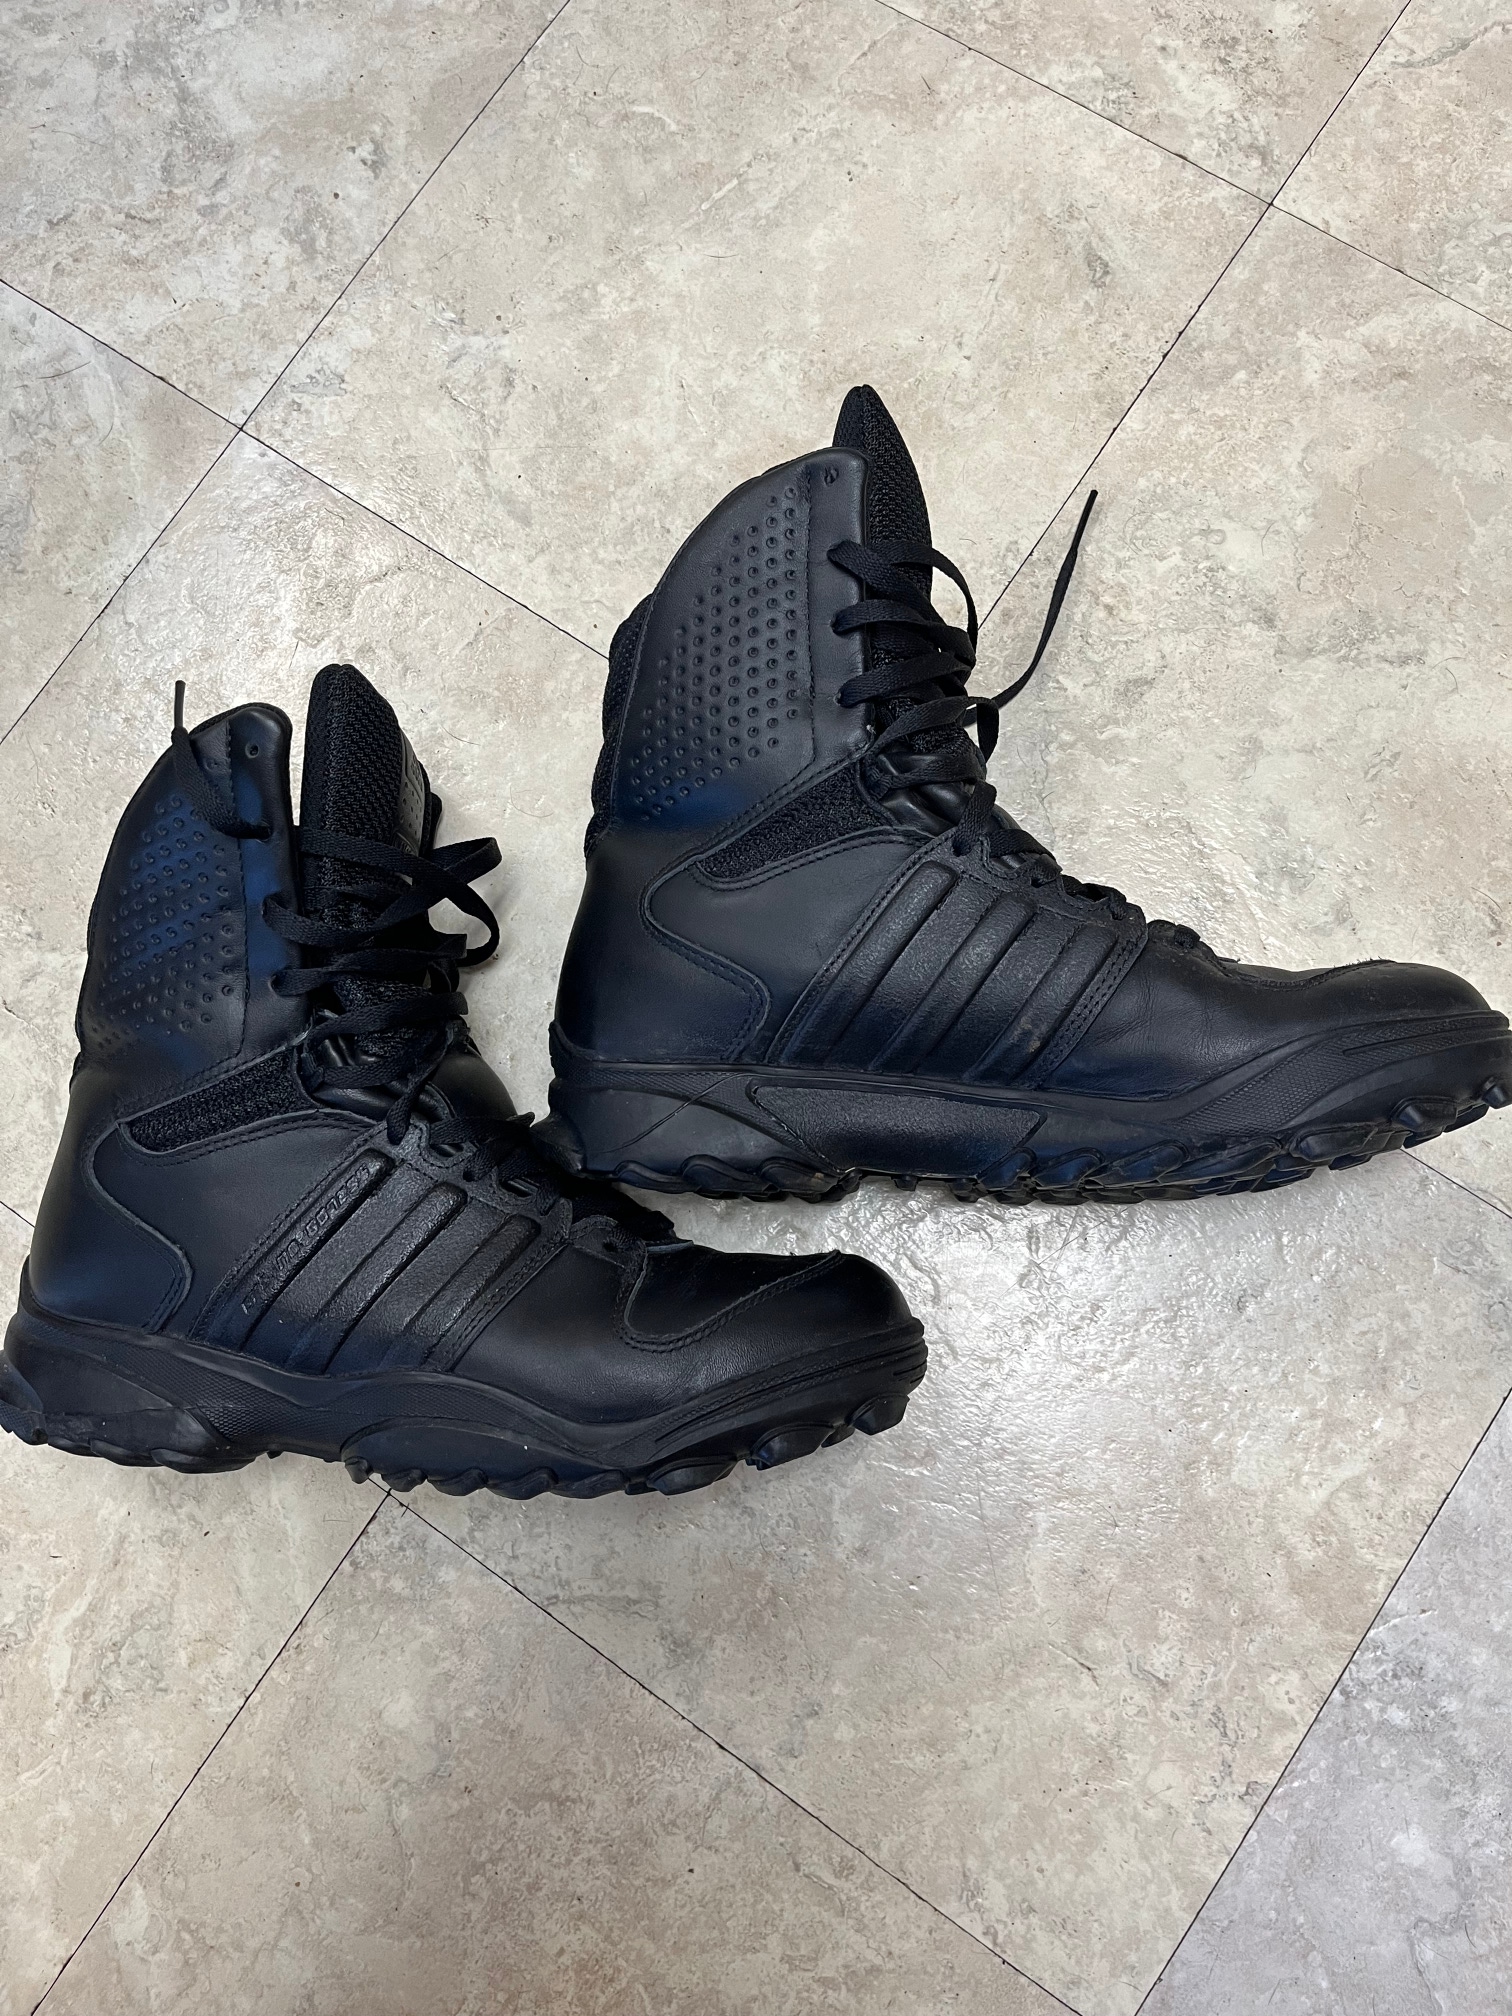 Adidas GSG 9 Tactical Boots, Black Leather, Size 11, Used